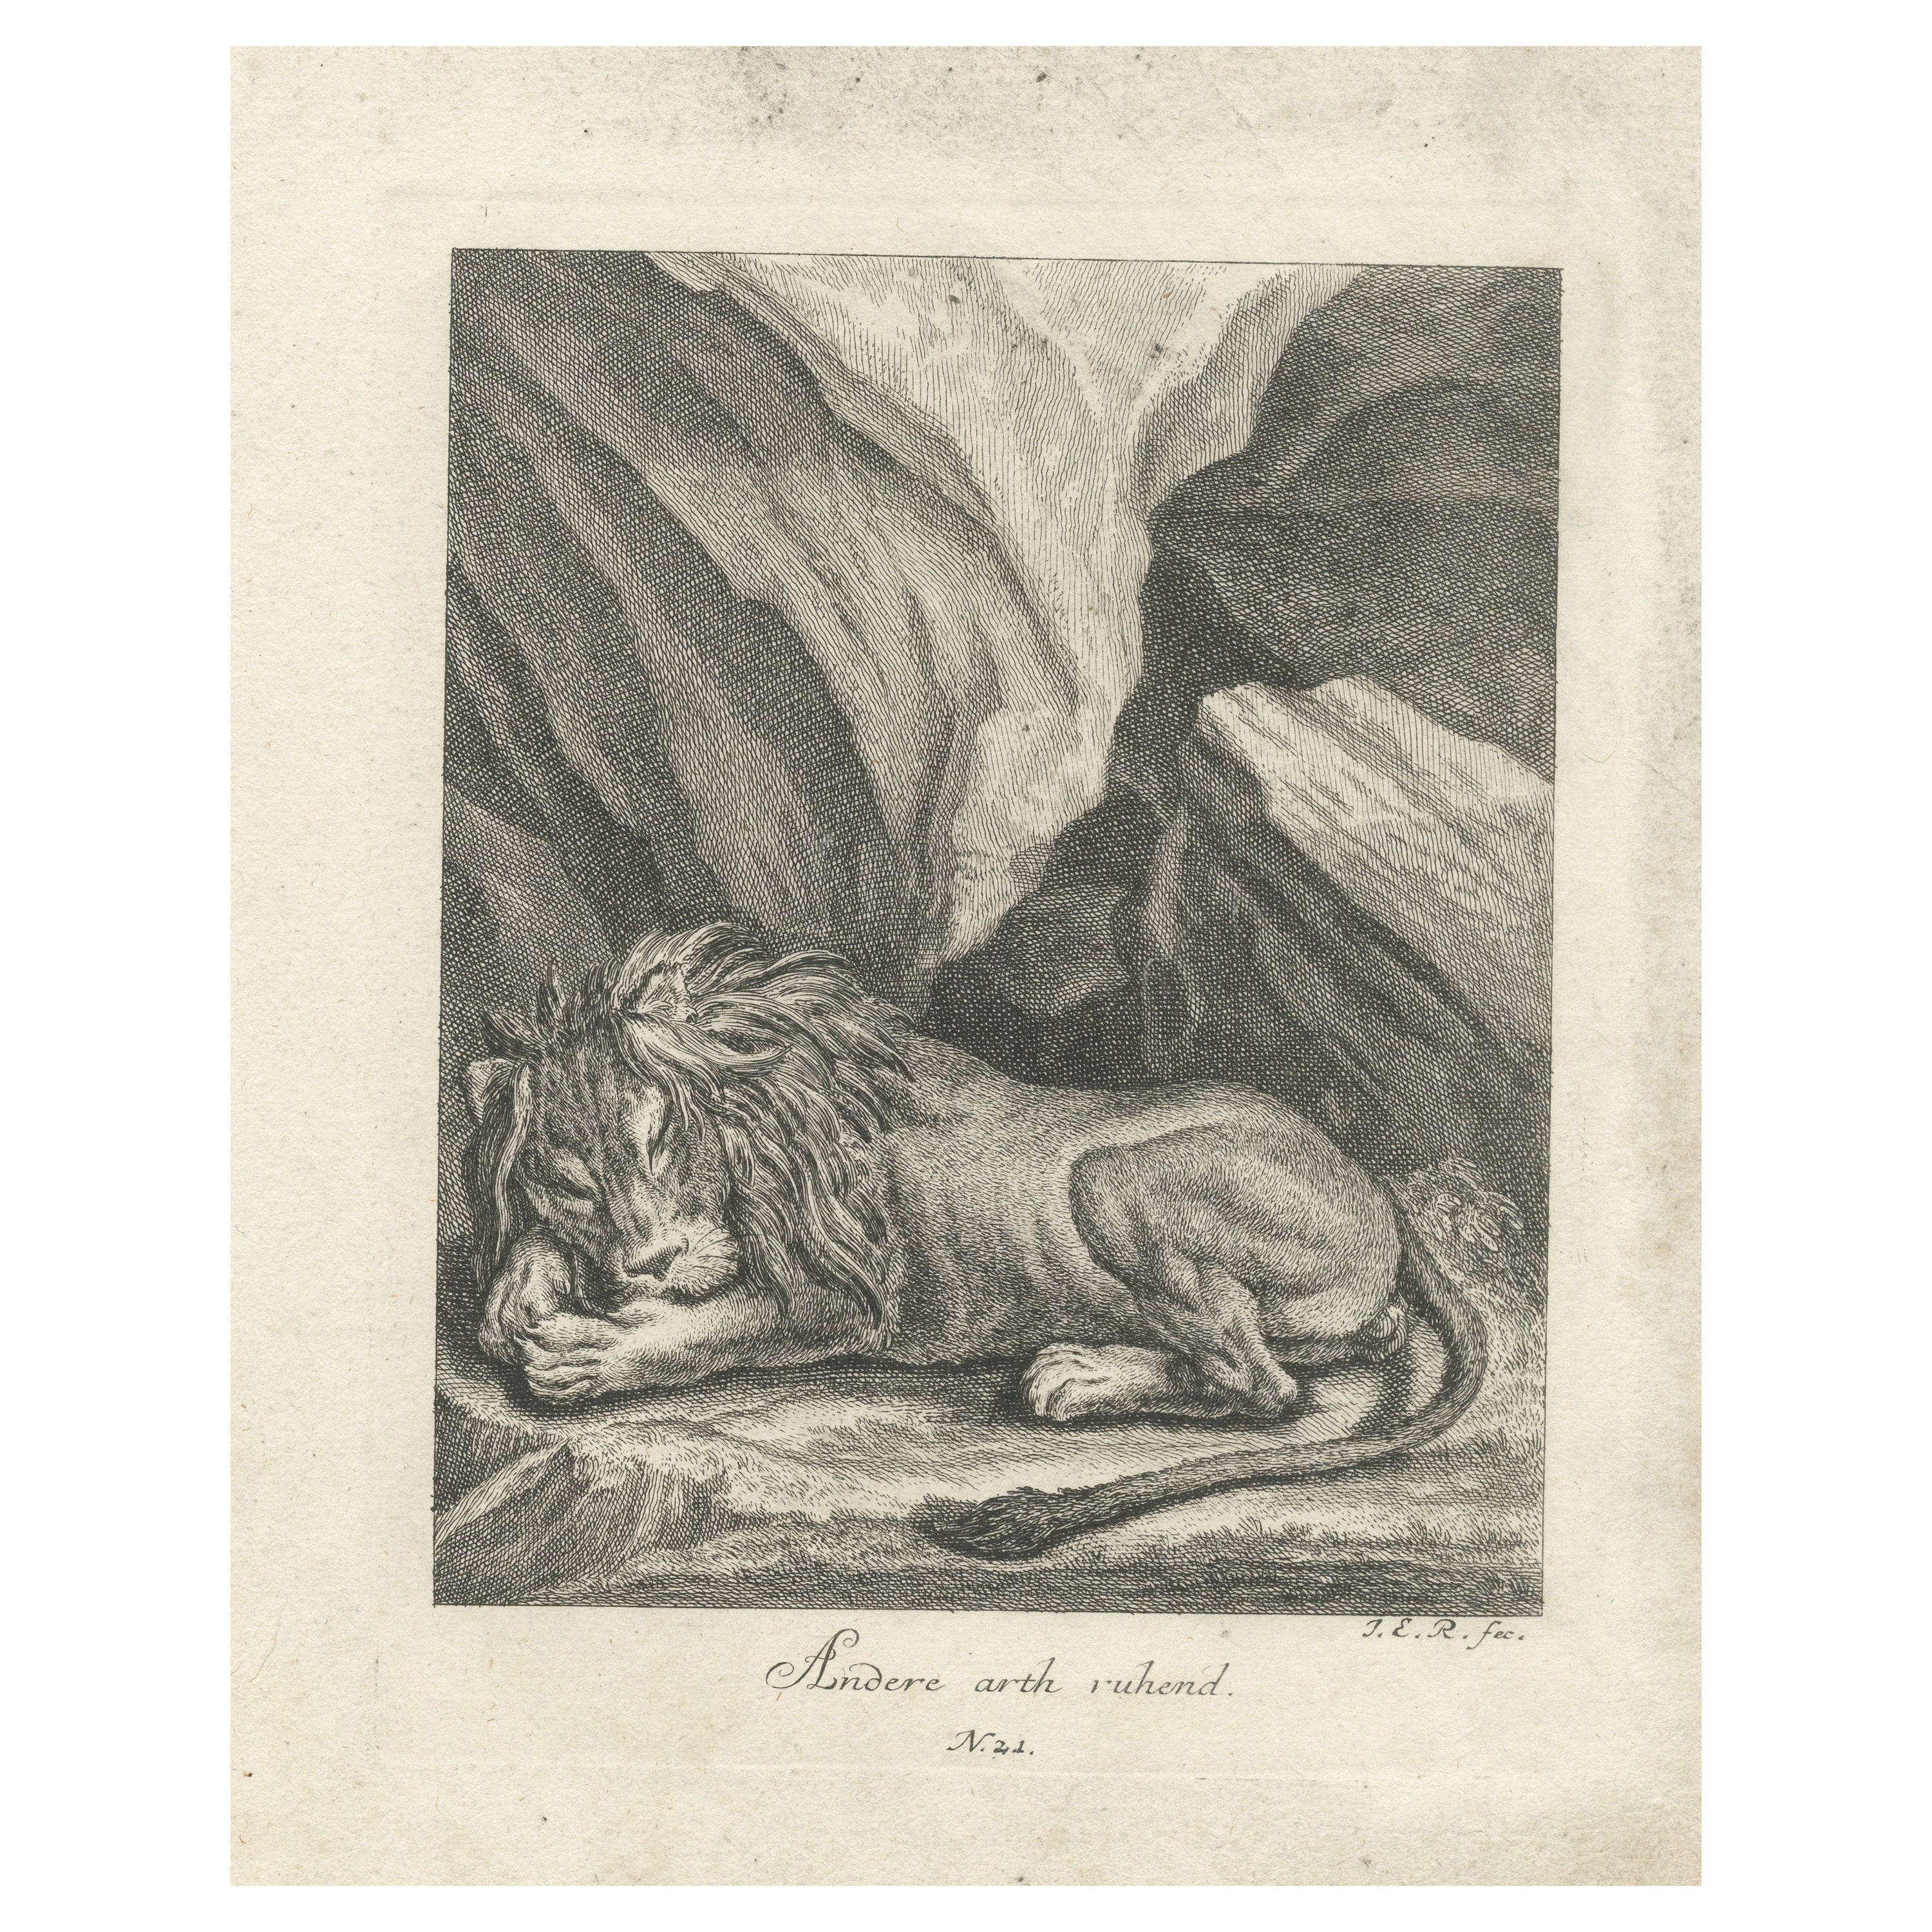 Antique Print of a sleeping Lion in a mountainous landscape